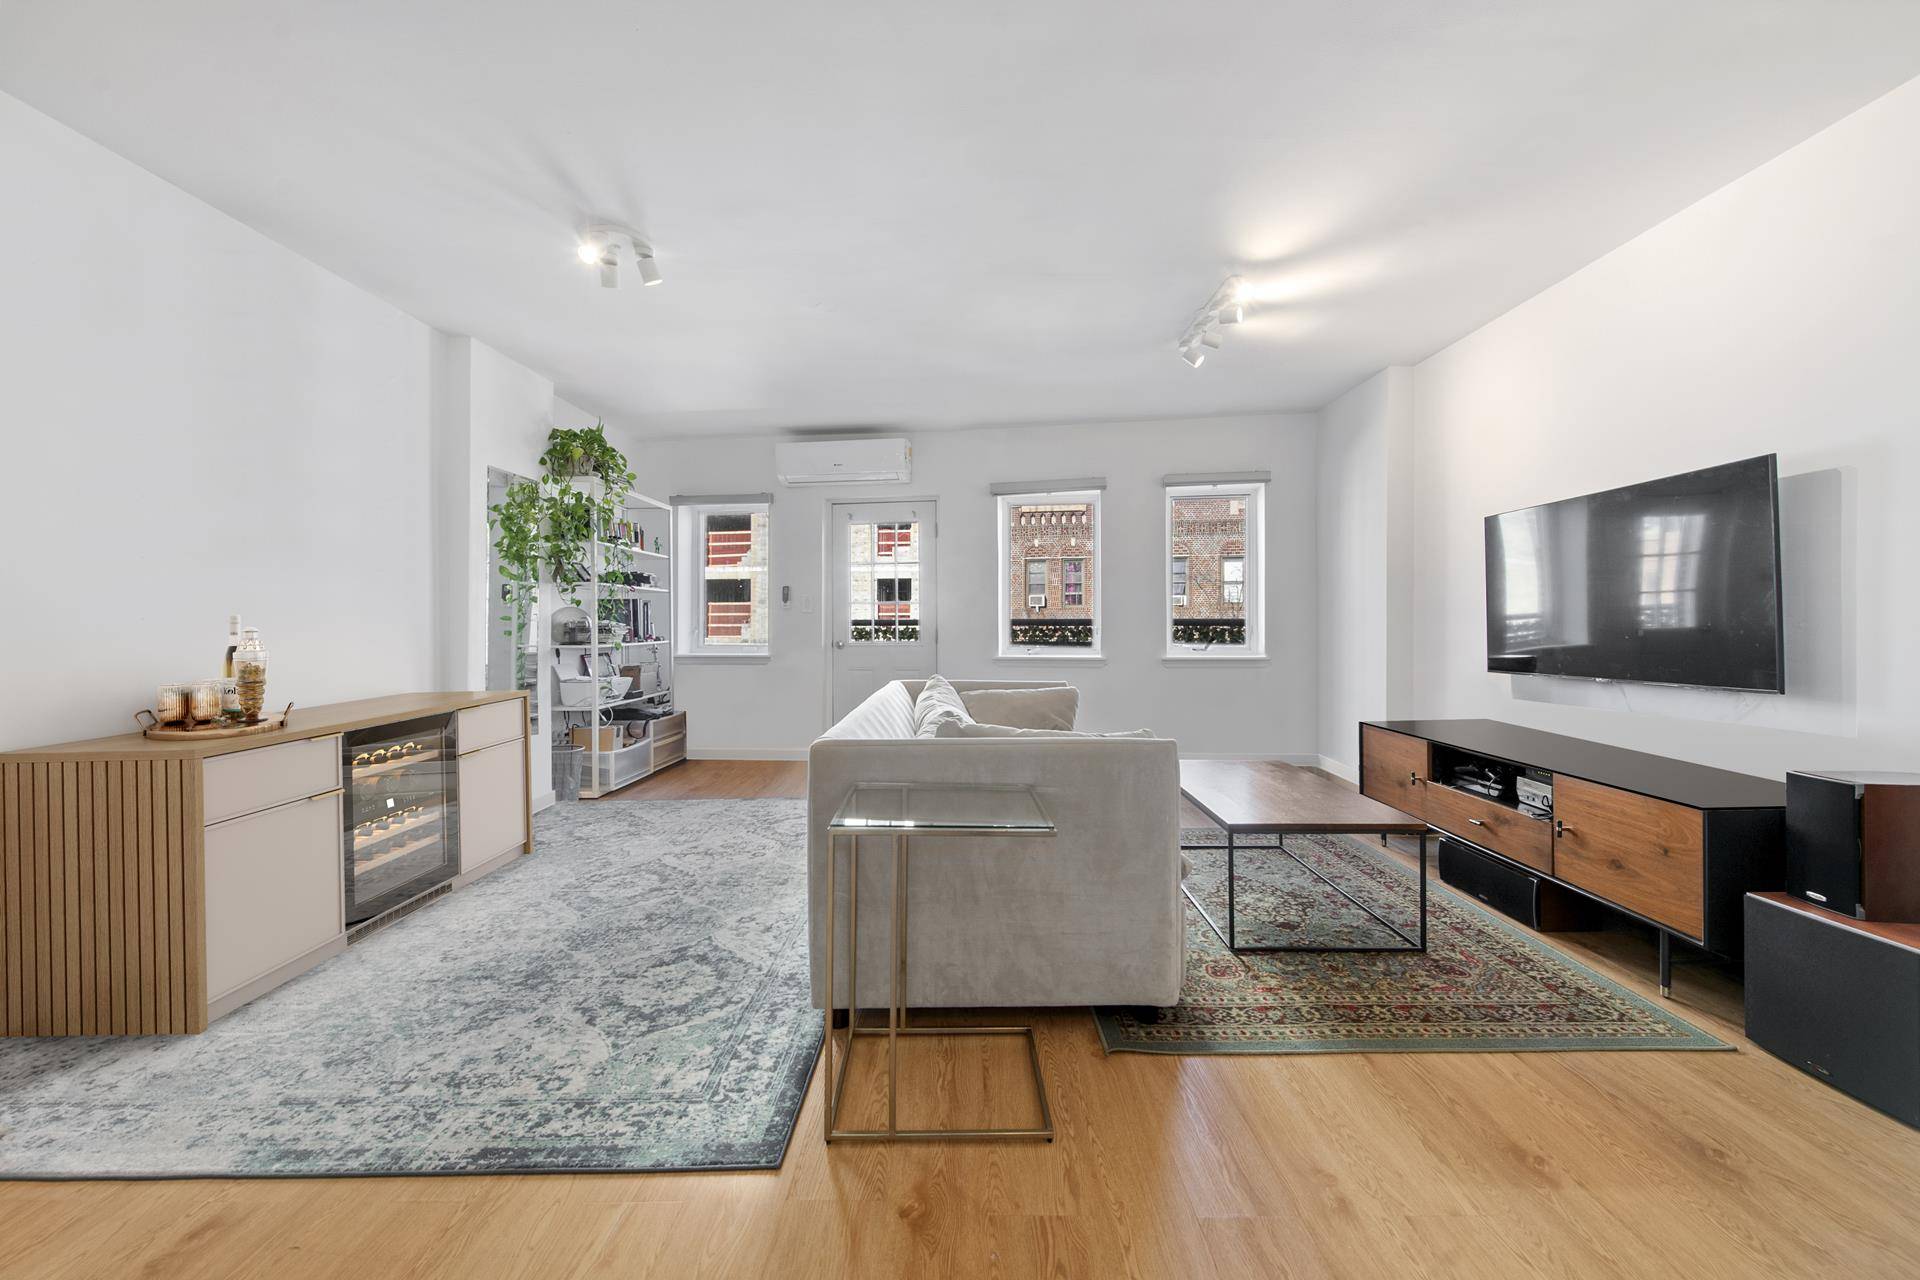 Experience the beauty of nature with this exquisite two bedroom, two bathroom condominium situated in the highly sought after Crown Heights neighborhood.